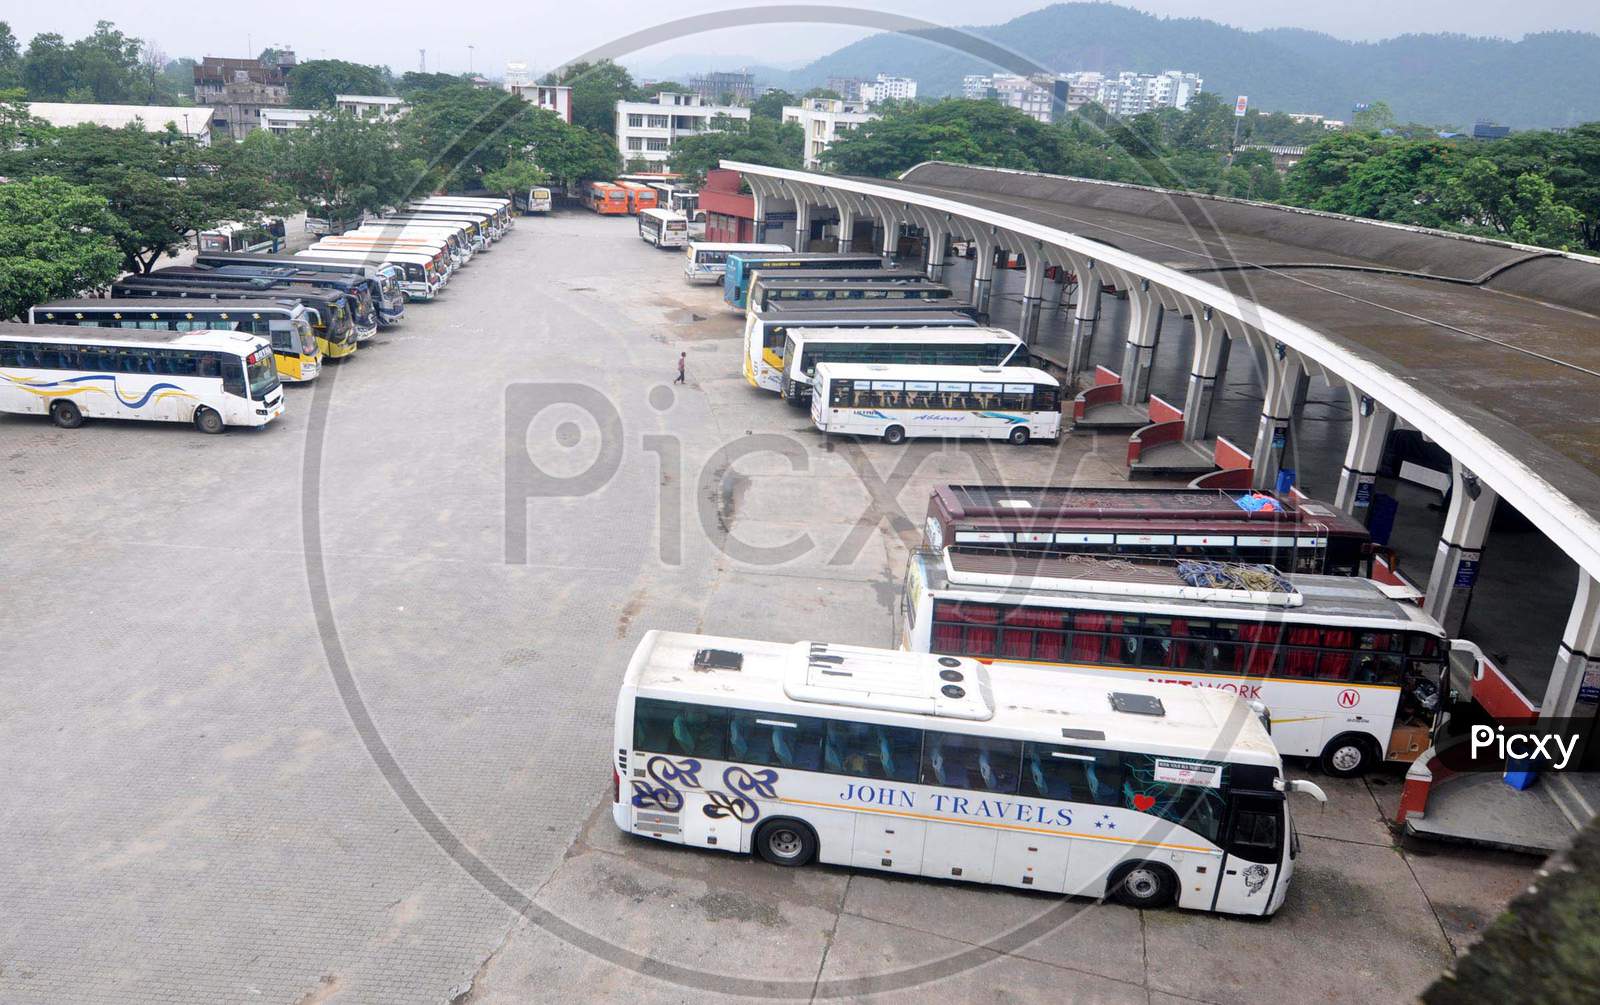 Buses Parked At The ISBT Following The Assam Government's Decision To Impose Total Lockdown To Curb The Spread Of Novel Coronavirus, In Guwahati on June 29, 2020.